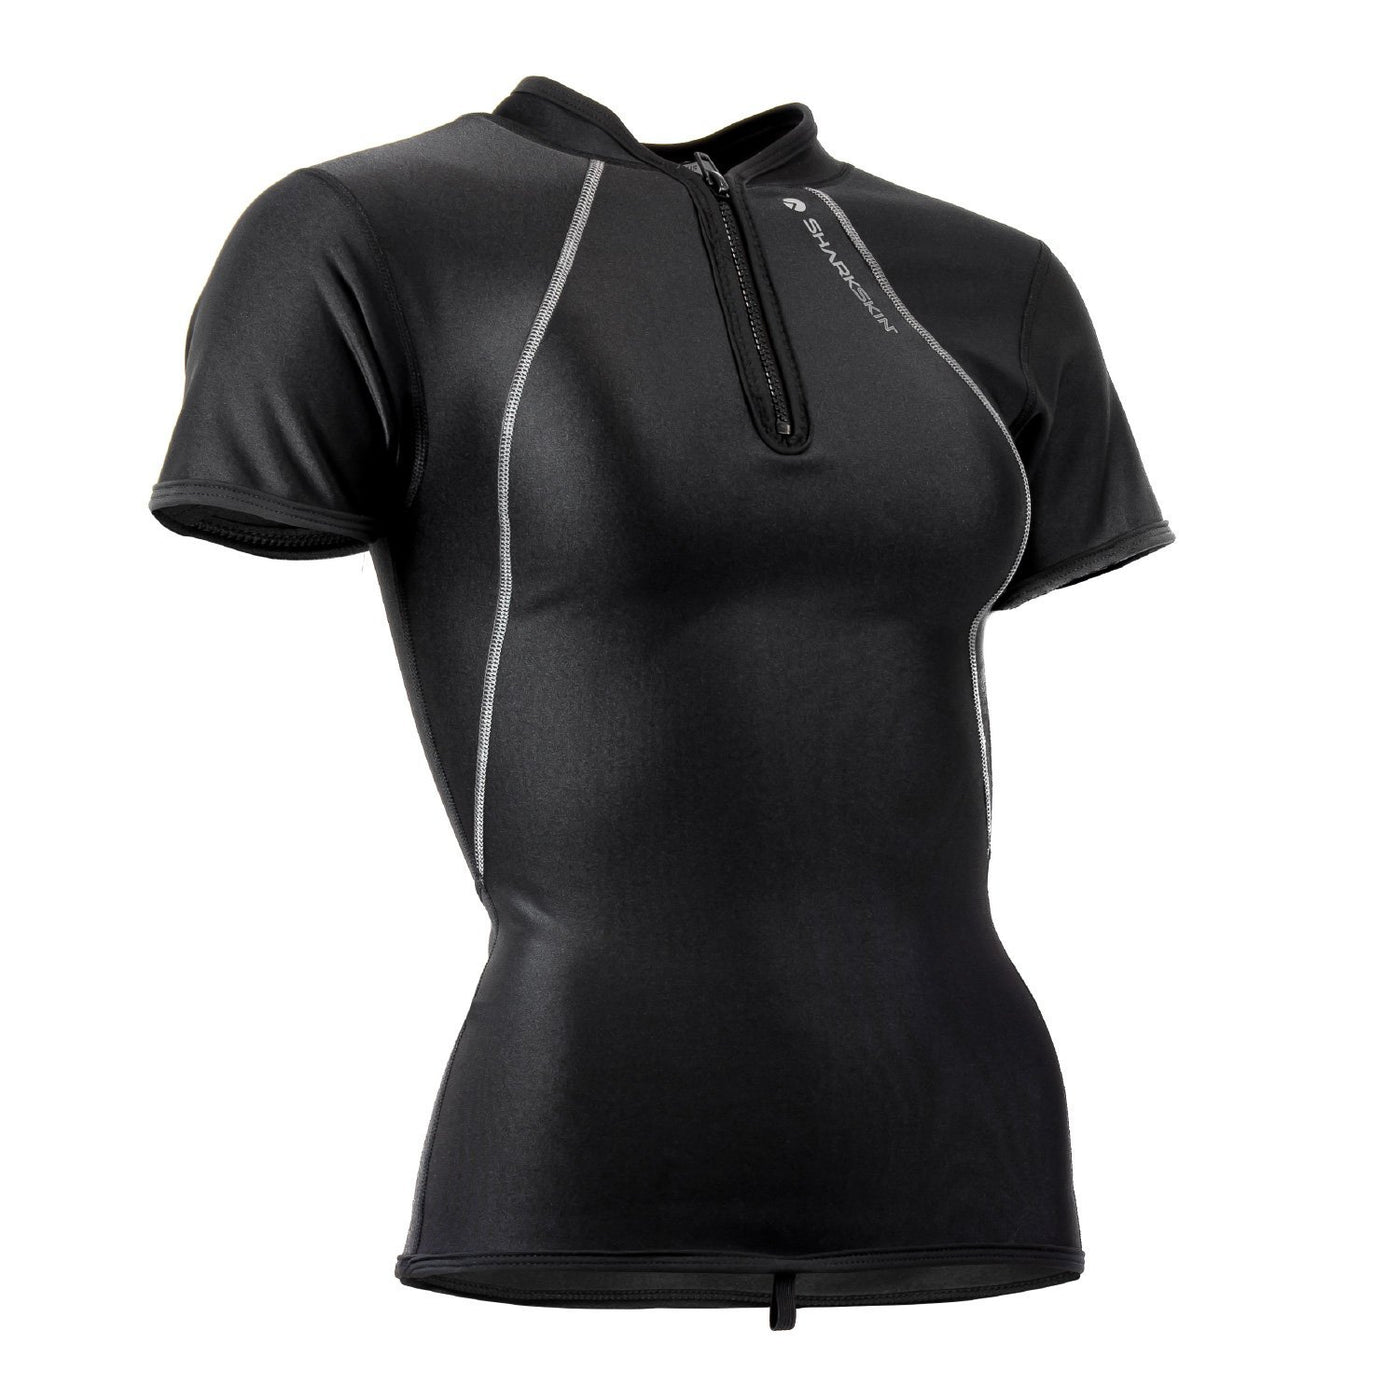 CHILLPROOF S/S CHEST ZIP - WOMENS (SECONDS)